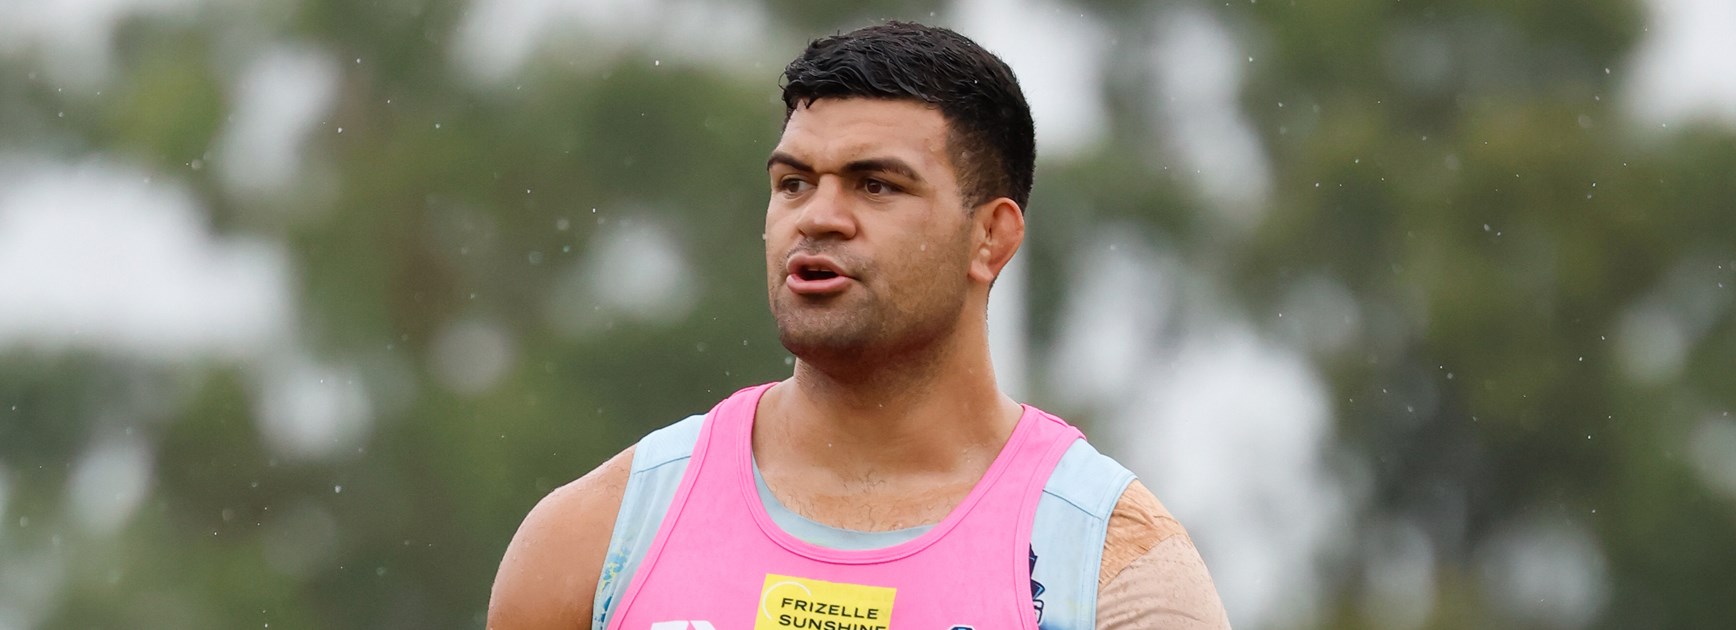 Injury report: Positive progressions for Fifita, Campbell